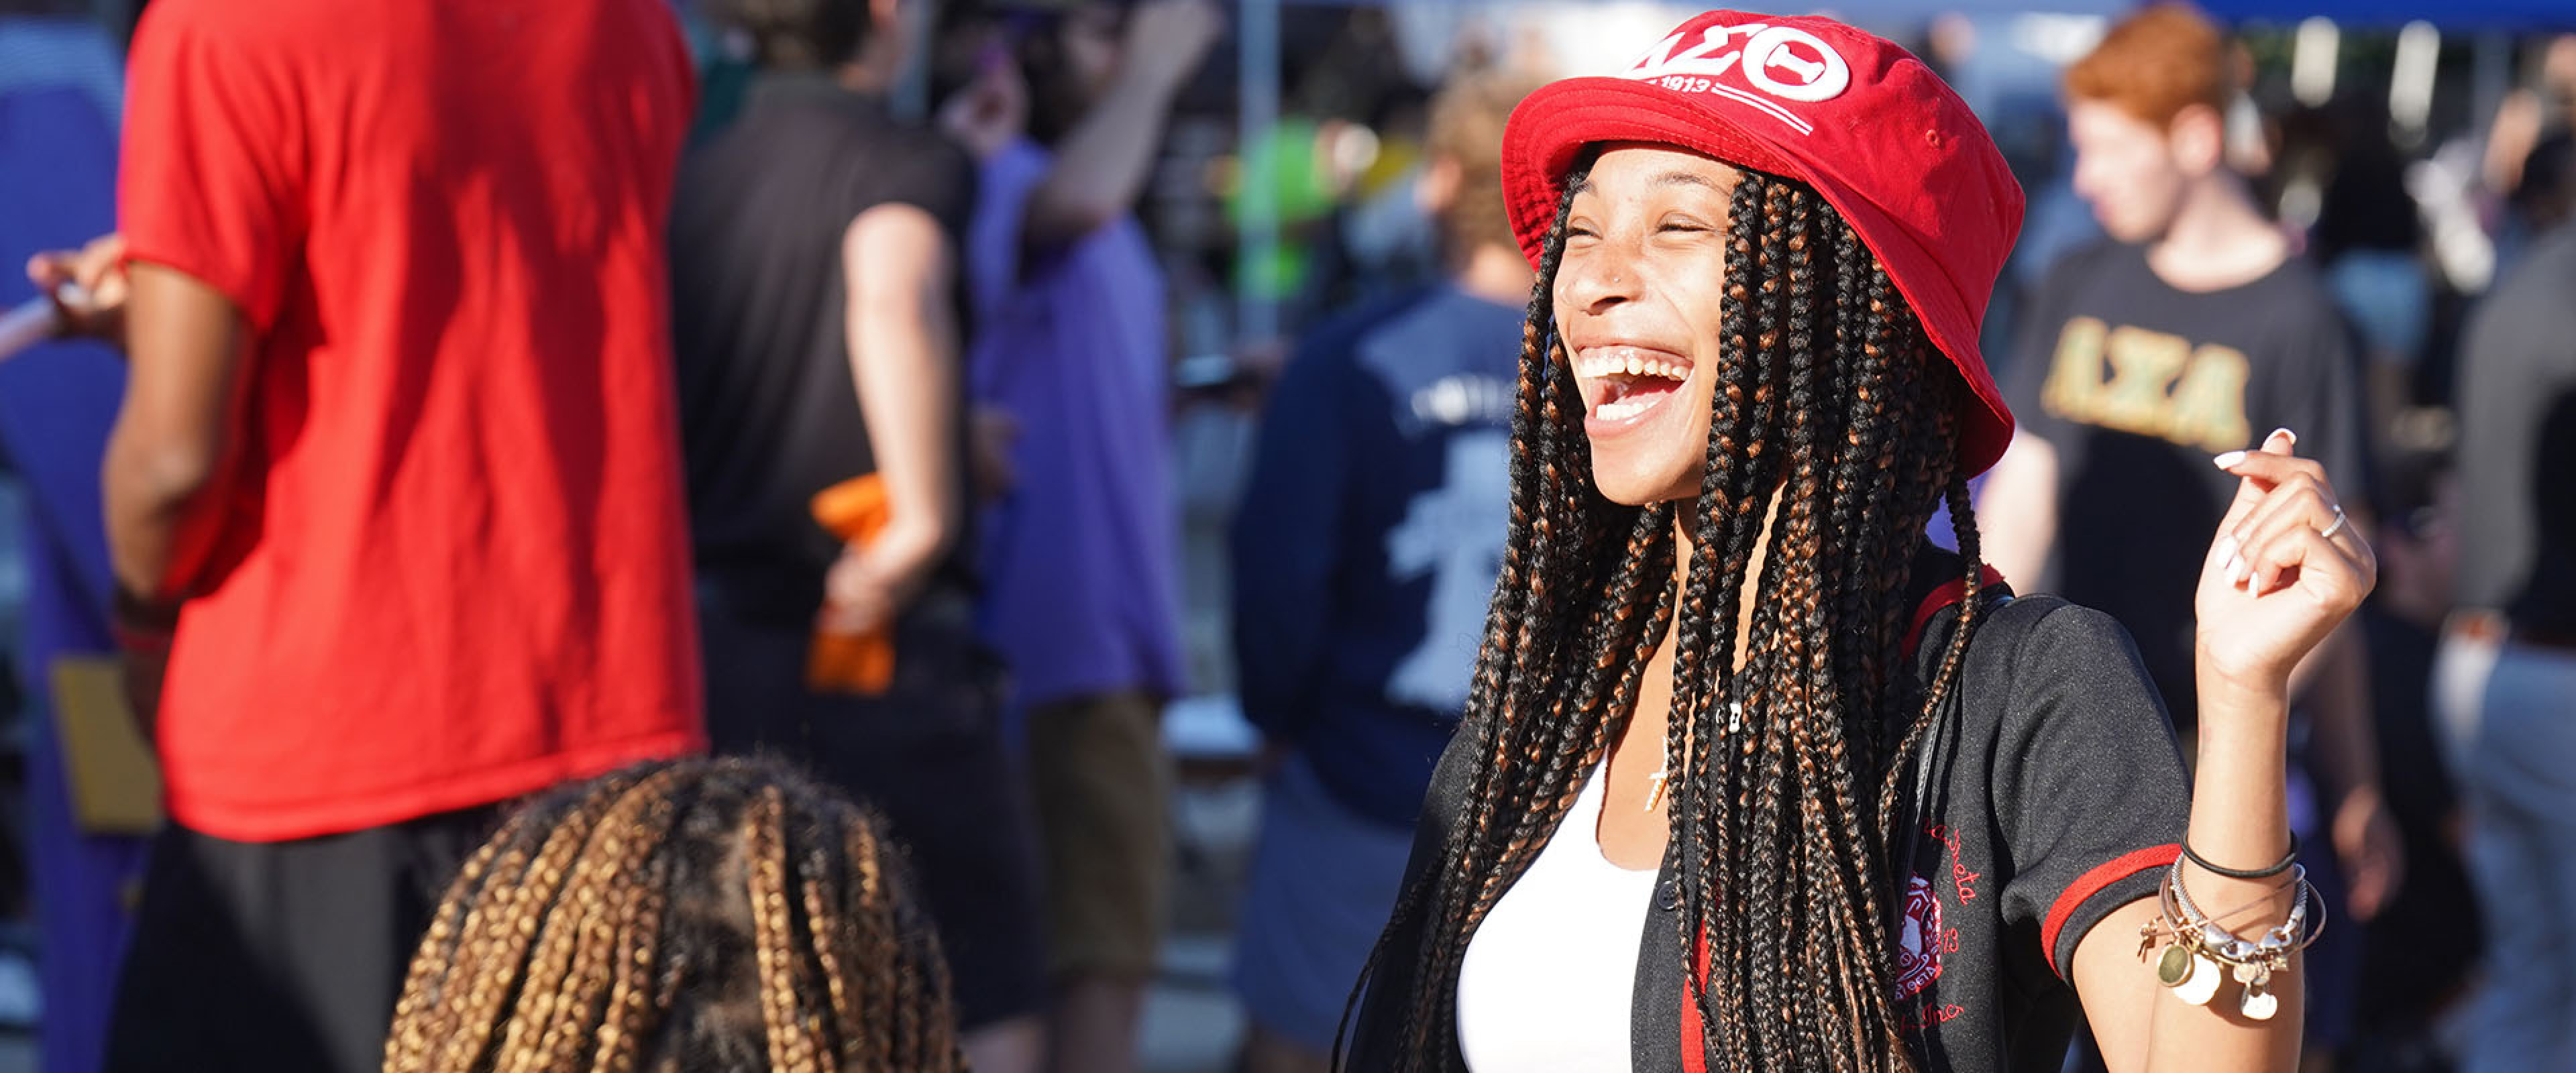 A WMU student laughing amidst a crowd